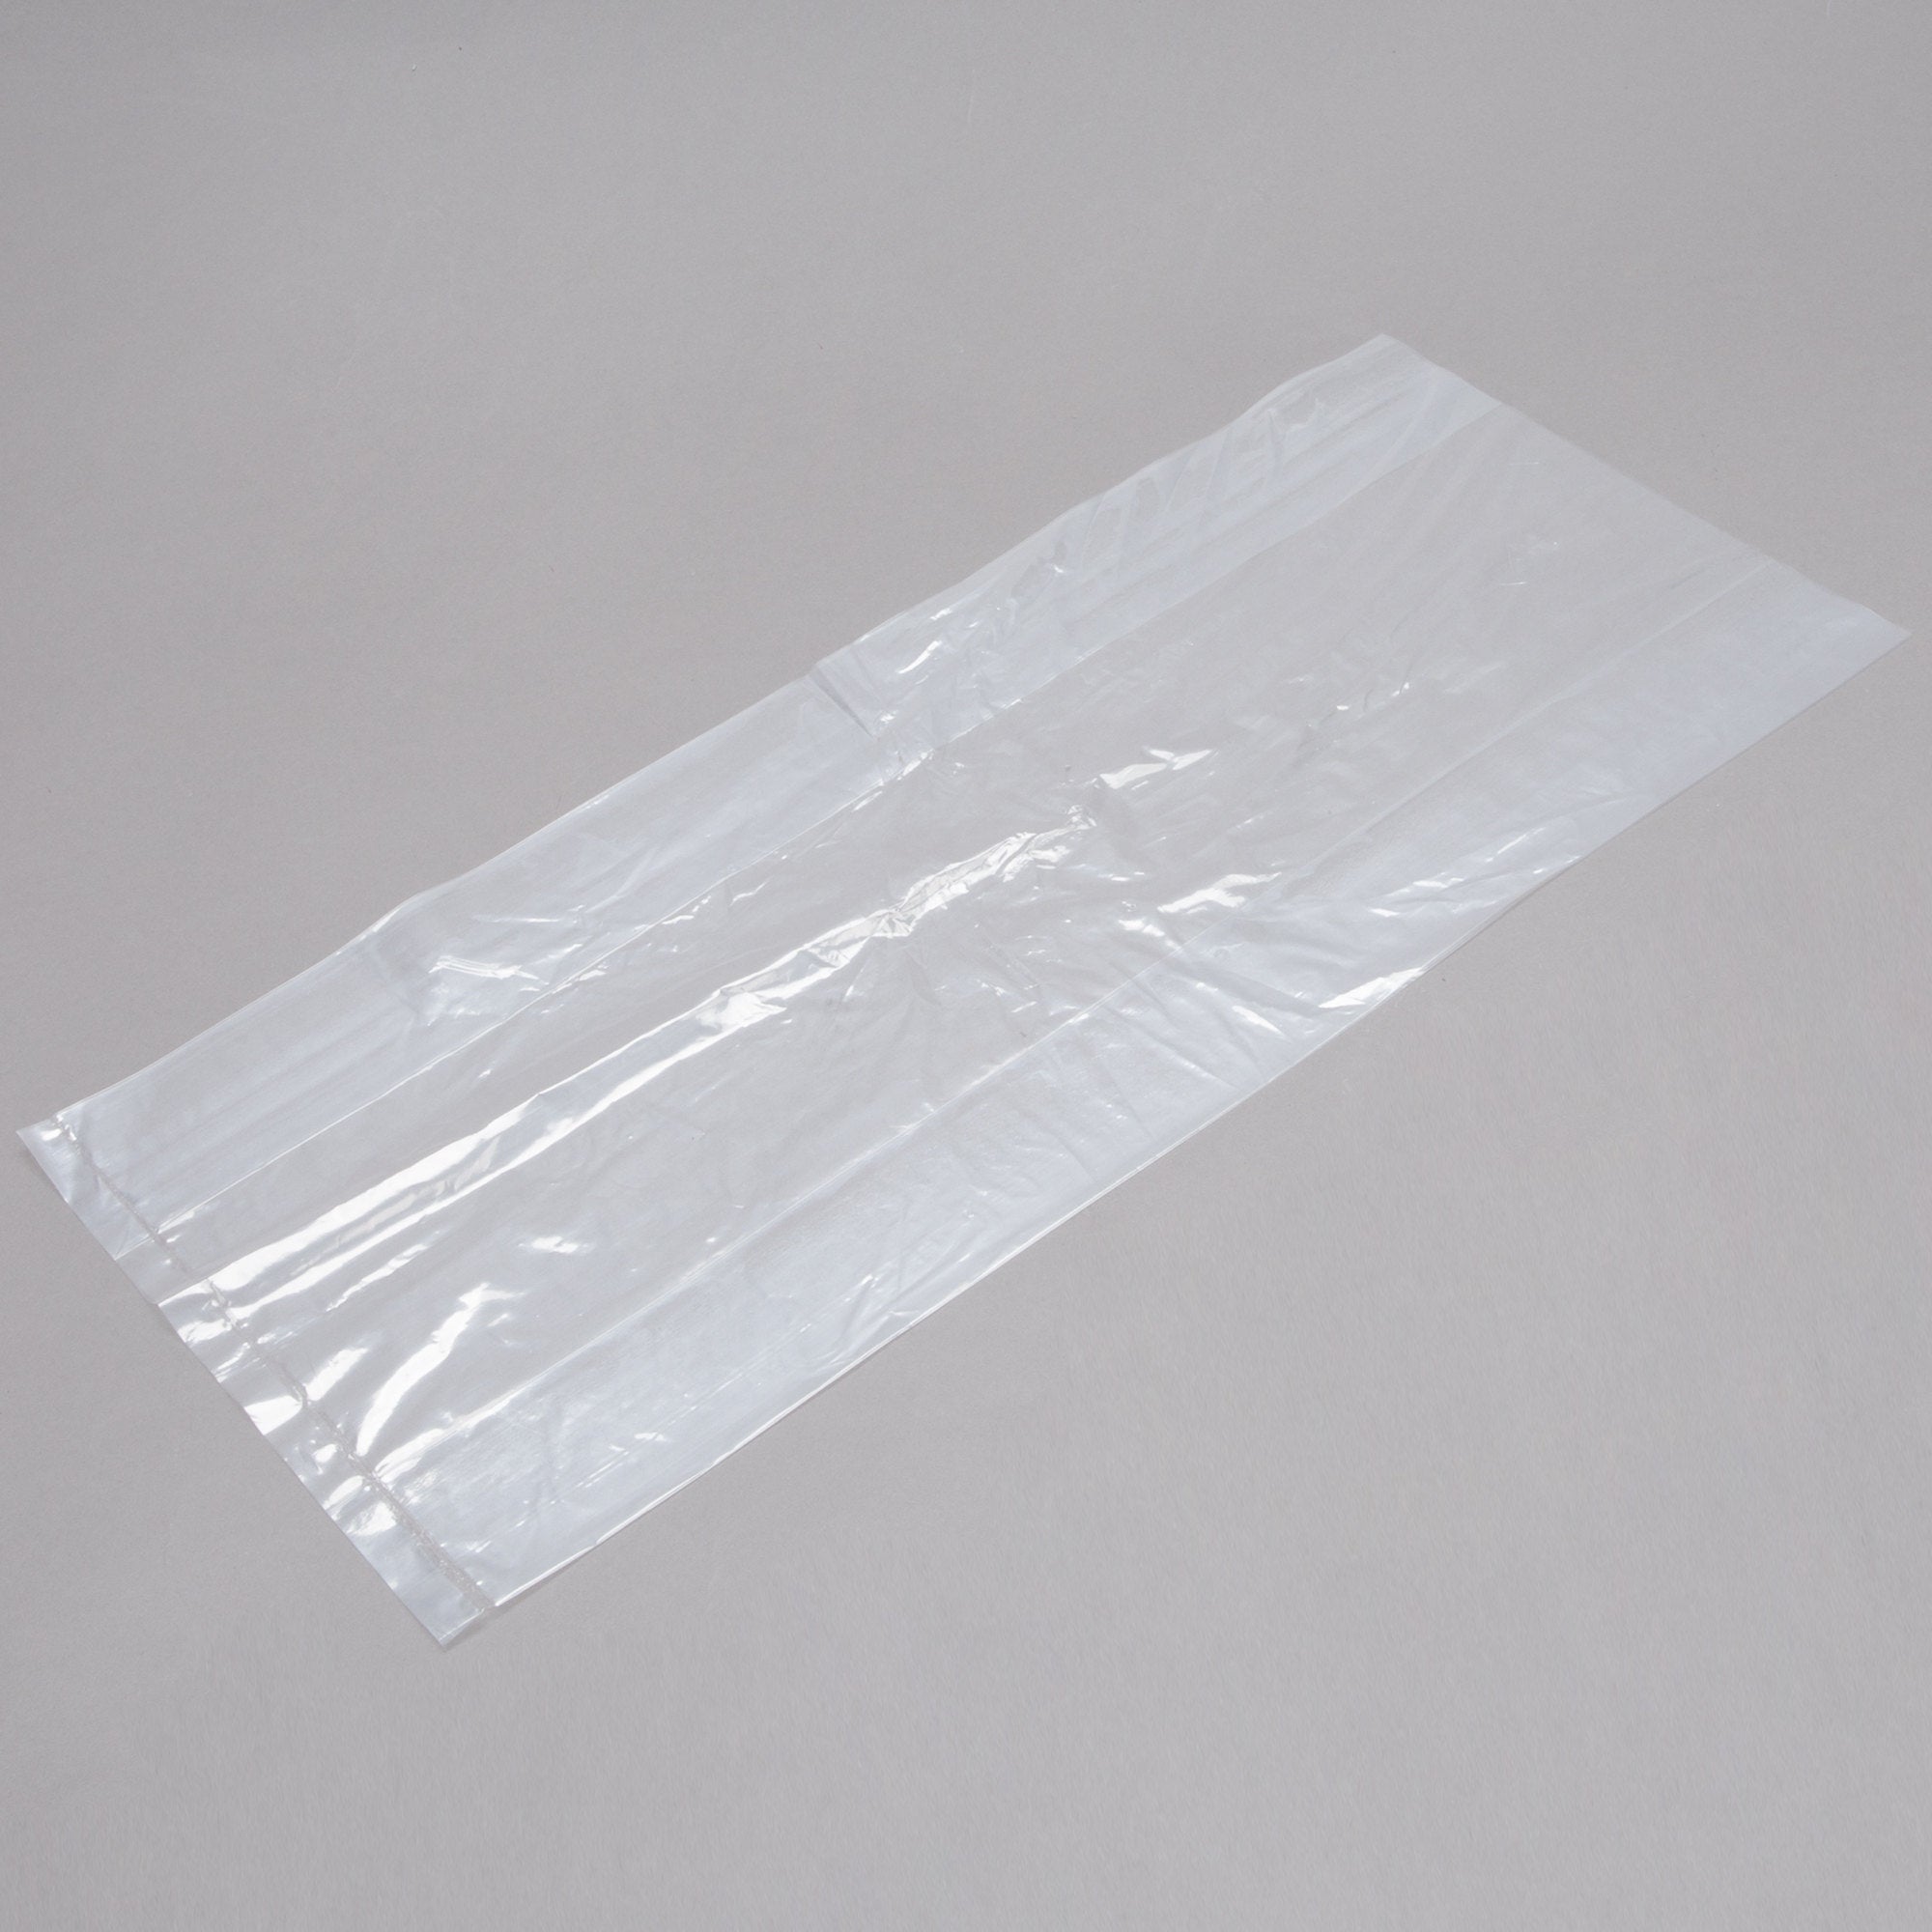 Amazon.com : Shop4Mailers 19 x 24 Clear Plastic Poly Bags 1.5 Mil Self Seal  Packaging for Apparel, Jewelry, Documents, Prints, Gifts, Storage –  Resealable (250 Pack) : Office Products